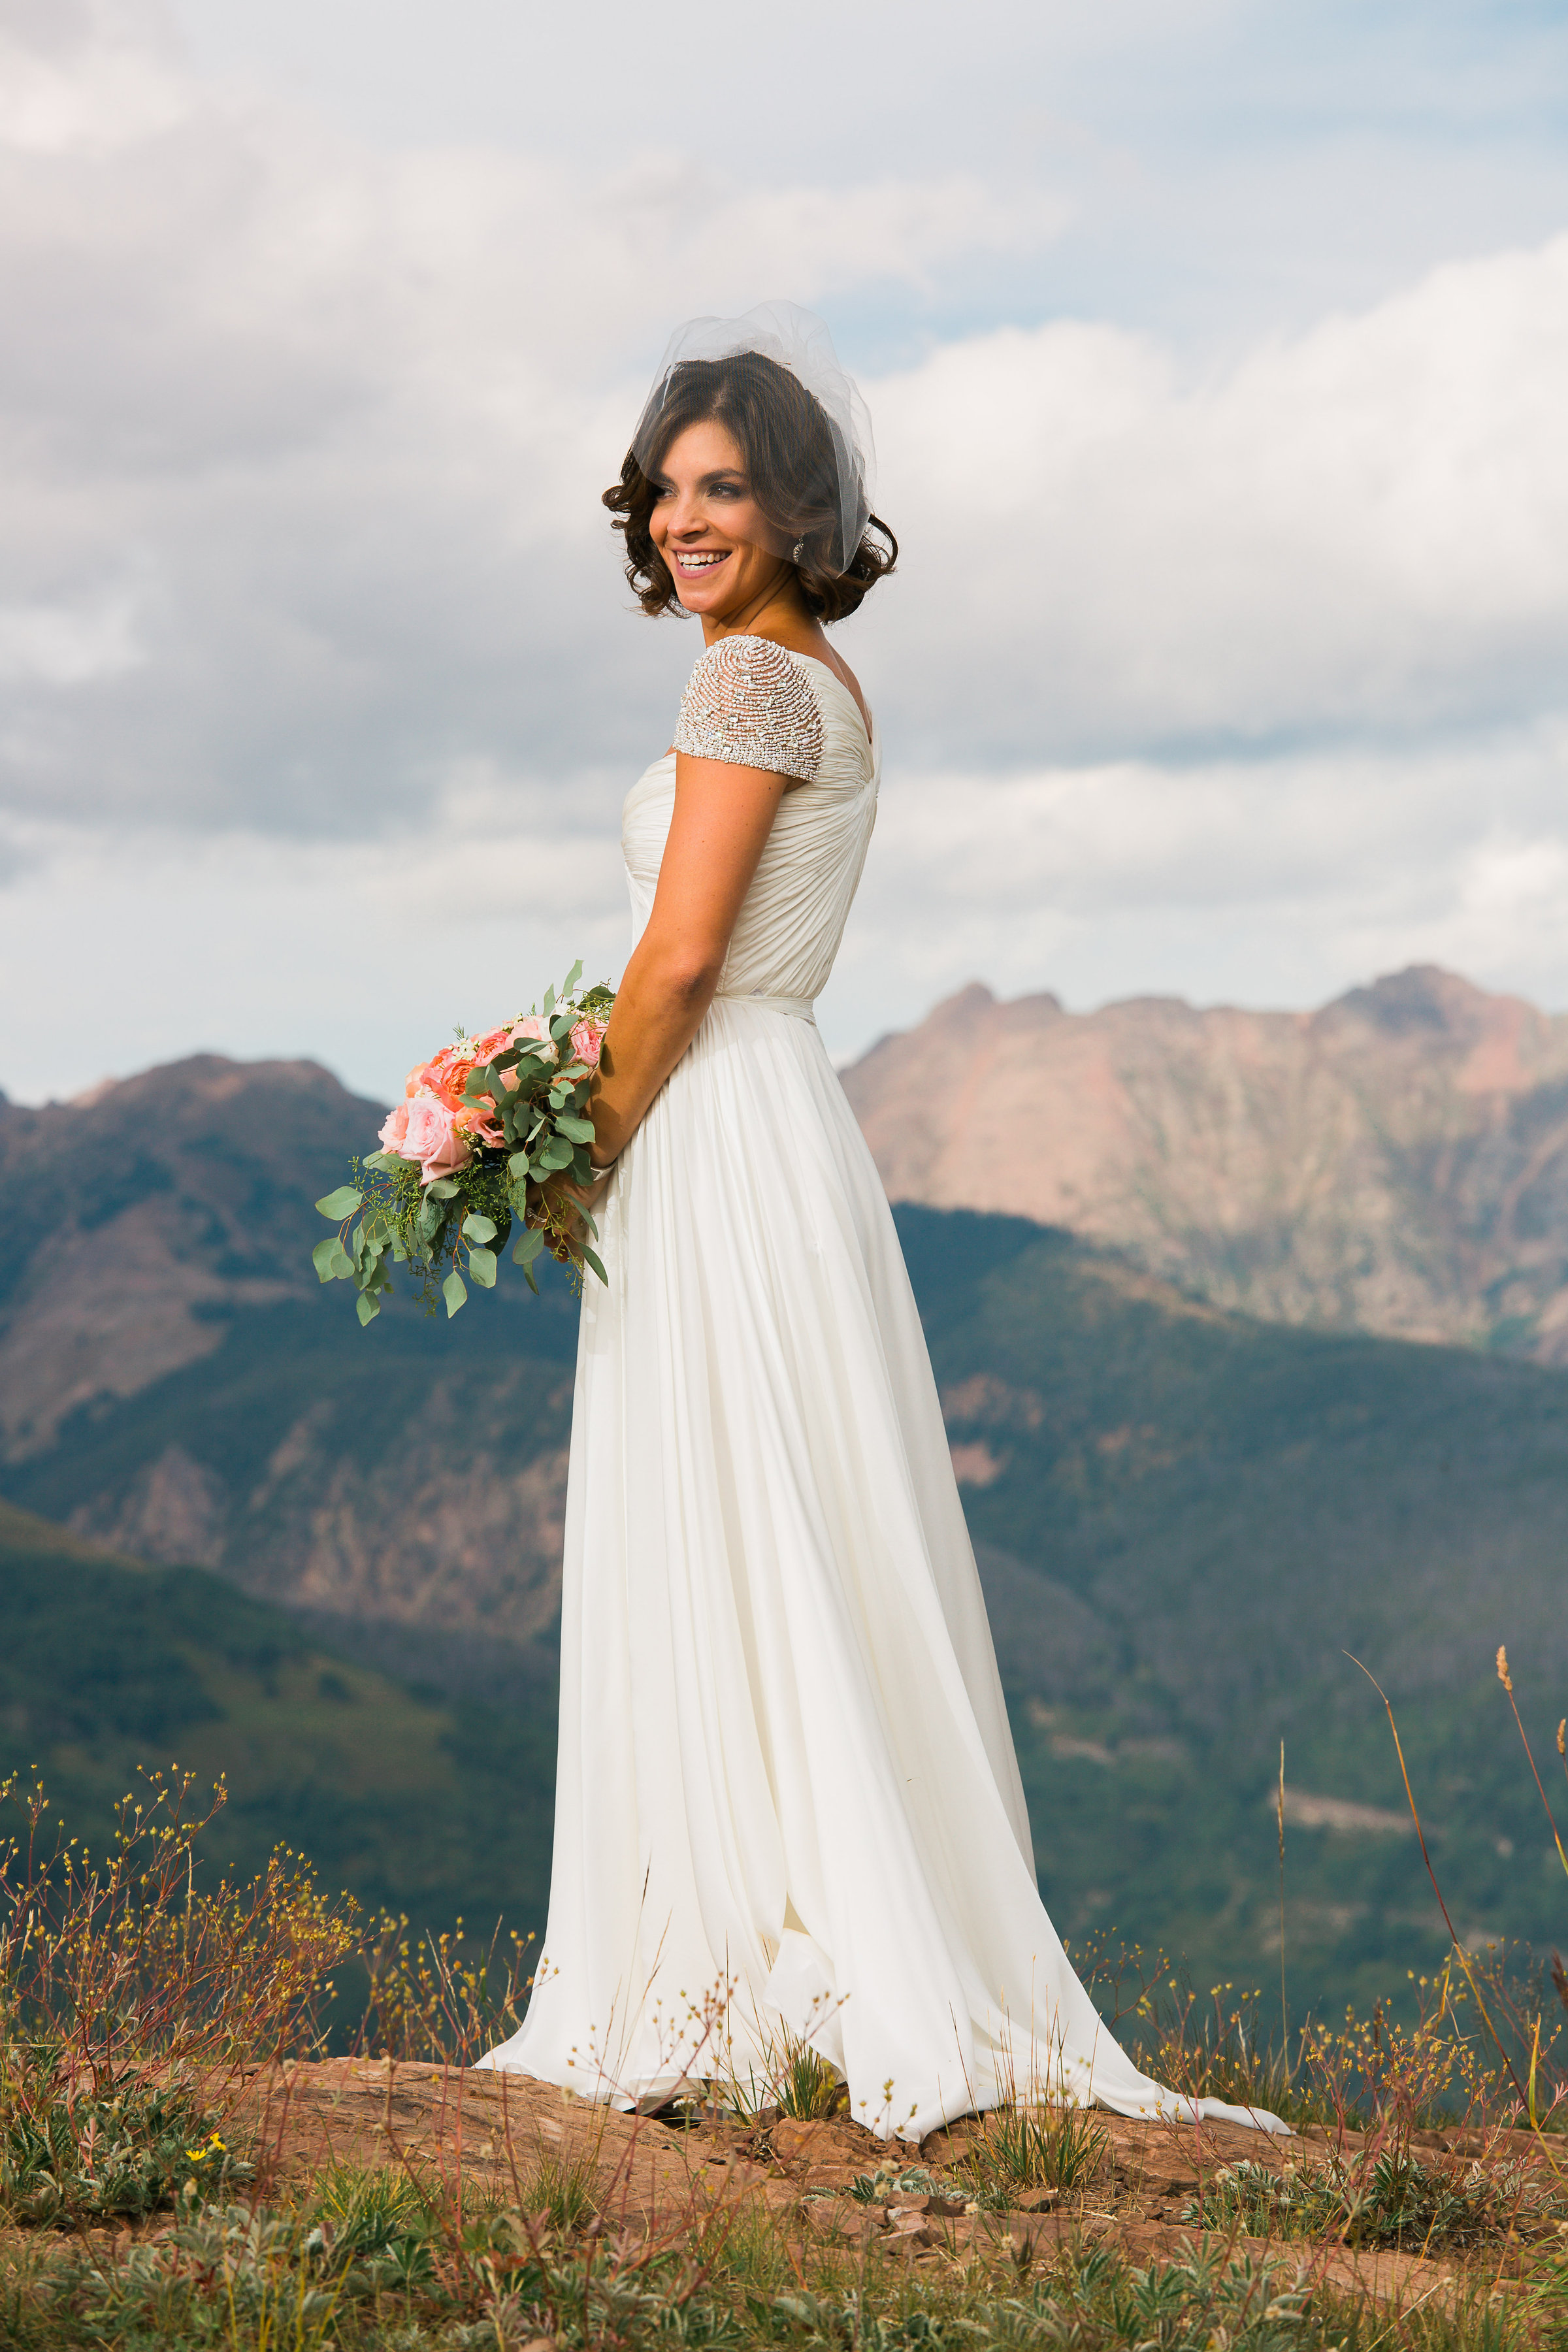  Alana | gown "Olivia" by Reem Acra | headpiece by Love Veils and Twigs &amp; Honey | all from LIttle White Dress Bridal Shop in Denver, Colorado |&nbsp; Tom K Photography  